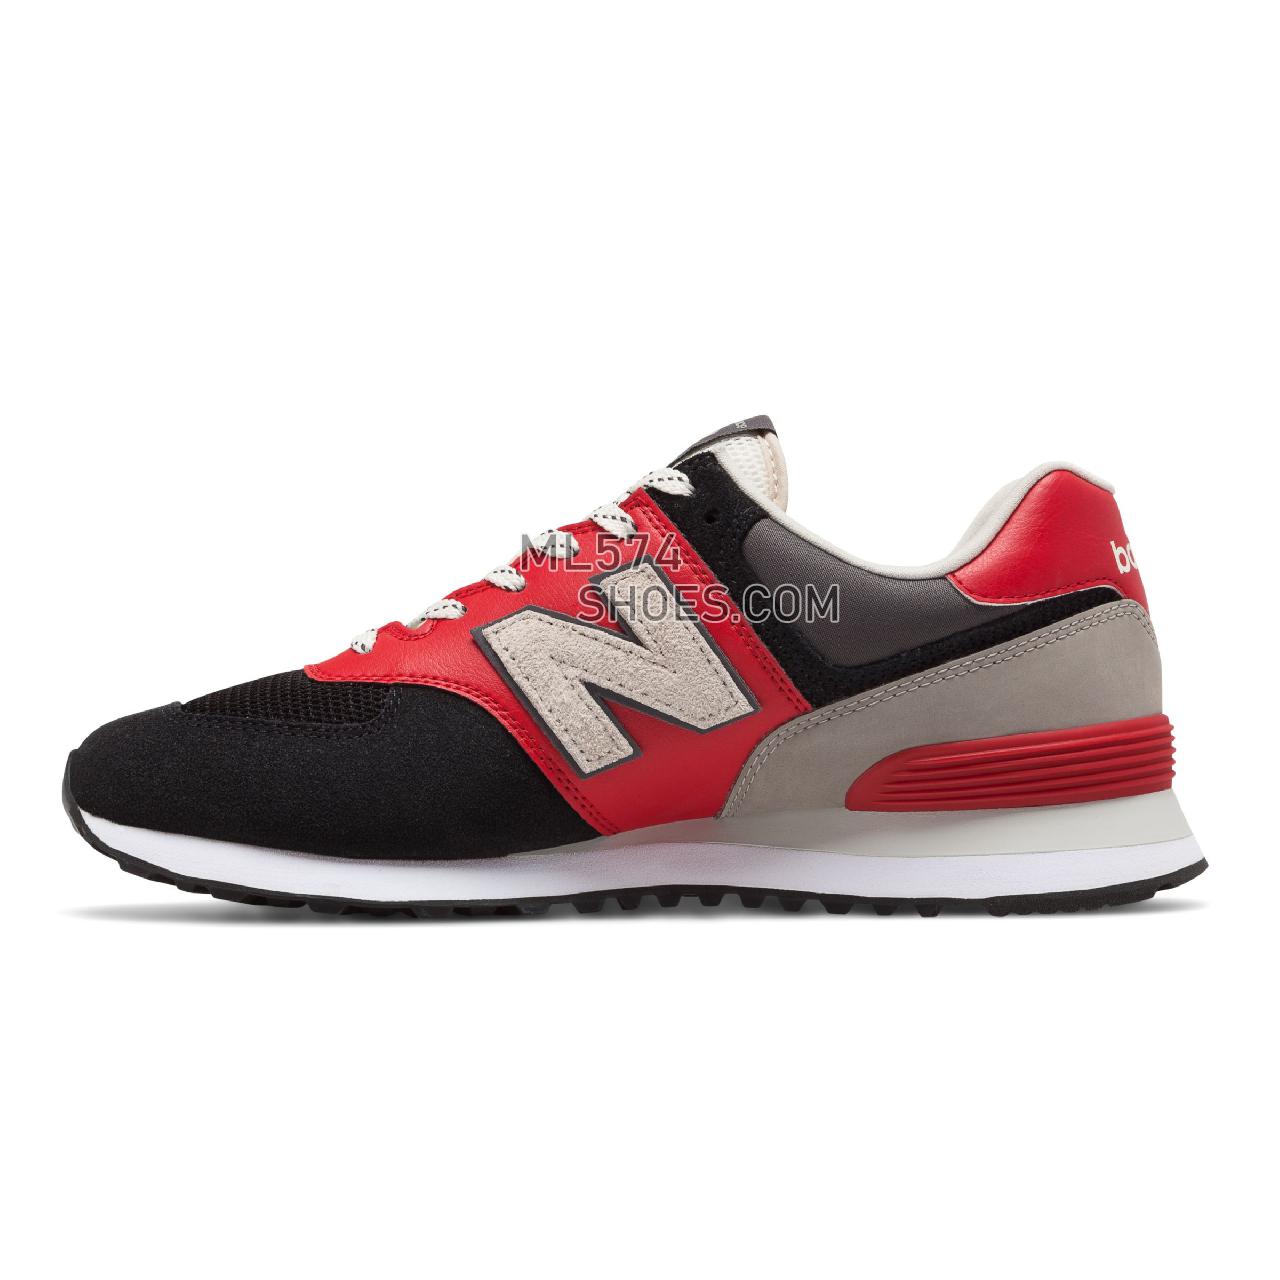 New Balance 574 - Men's Classic Sneakers - Black with Red - ML574MY